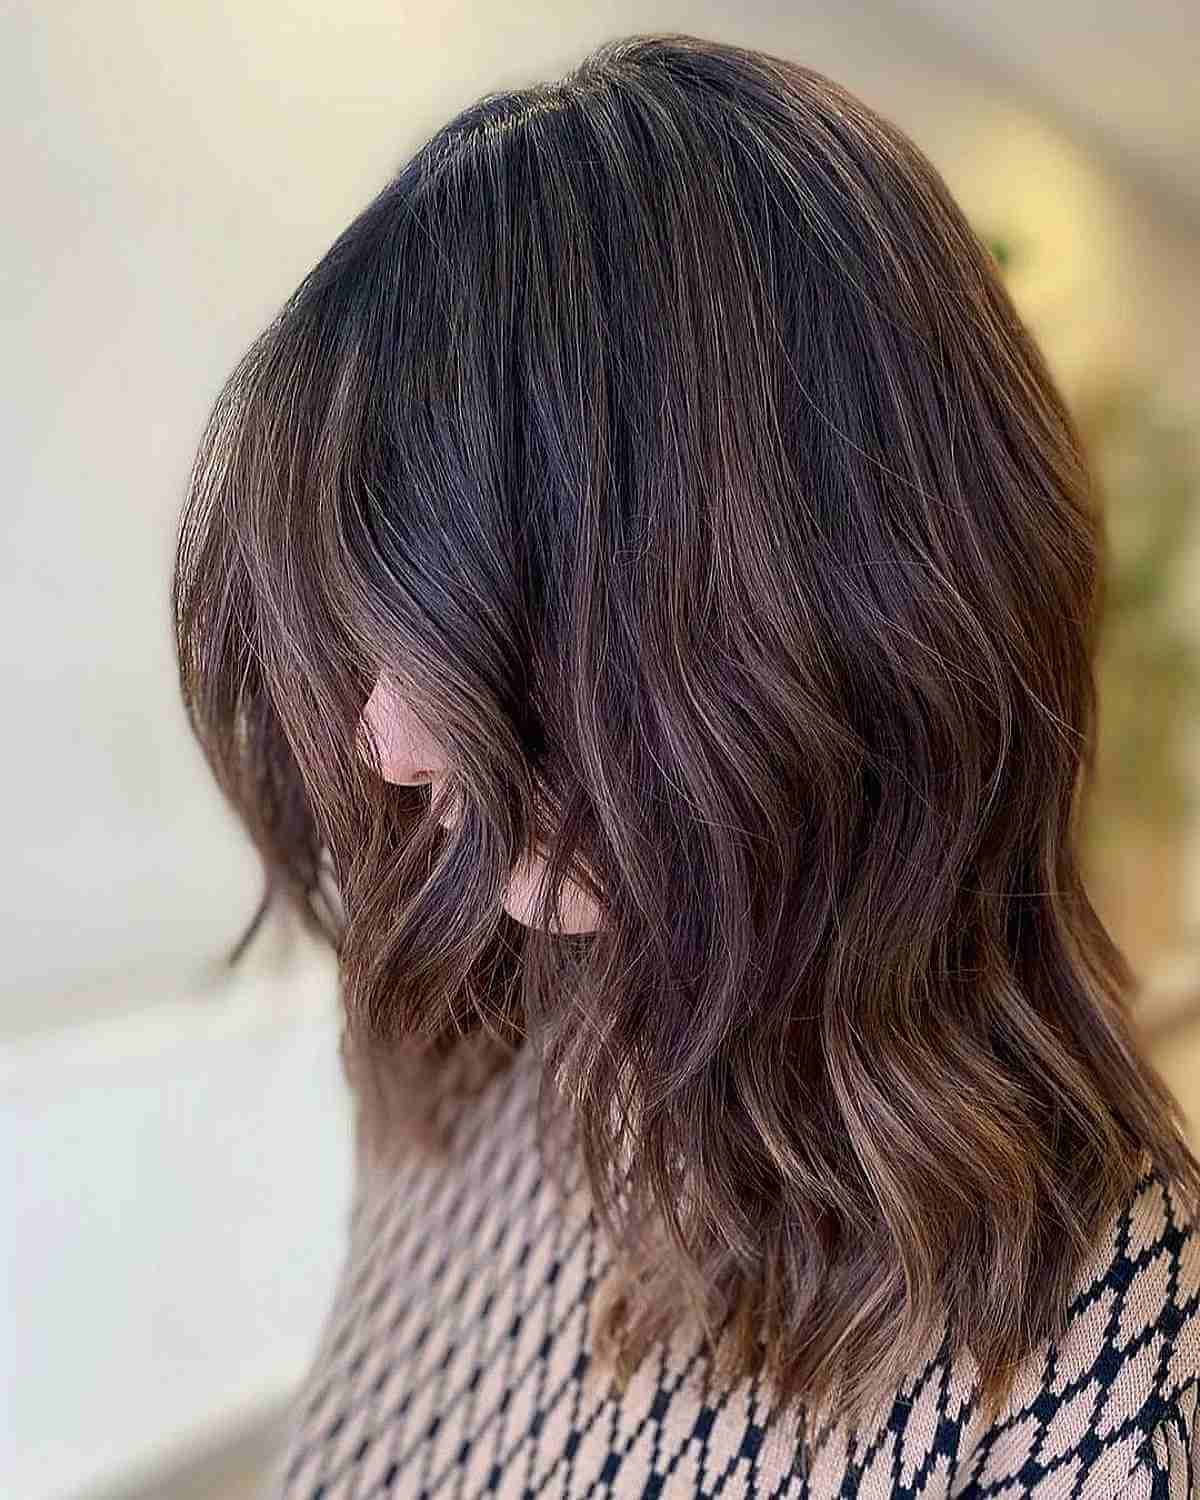 A soft shoulder length haircut with layers and textured ends is a sexy and effortless looking hairstyle to try